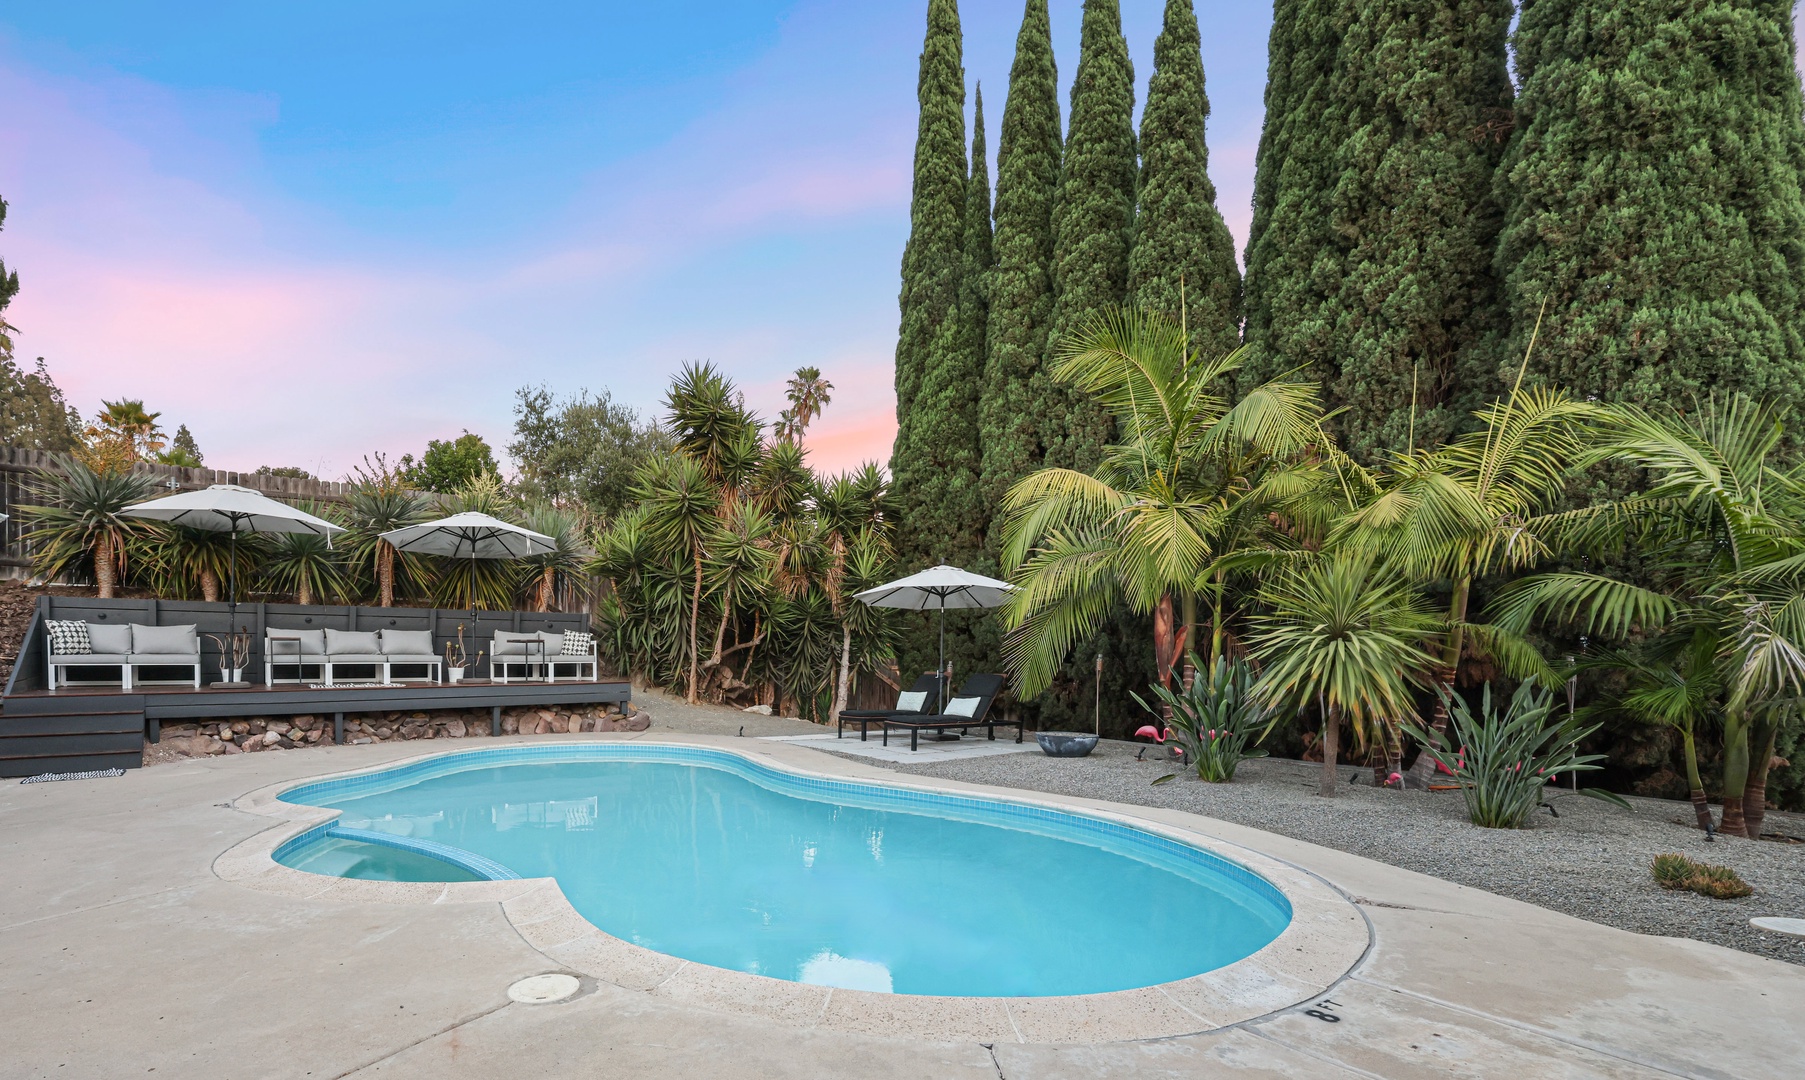 Relax and enjoy all San Diego has to offer from this plush, private oasis in the foothills of Mt Helix.